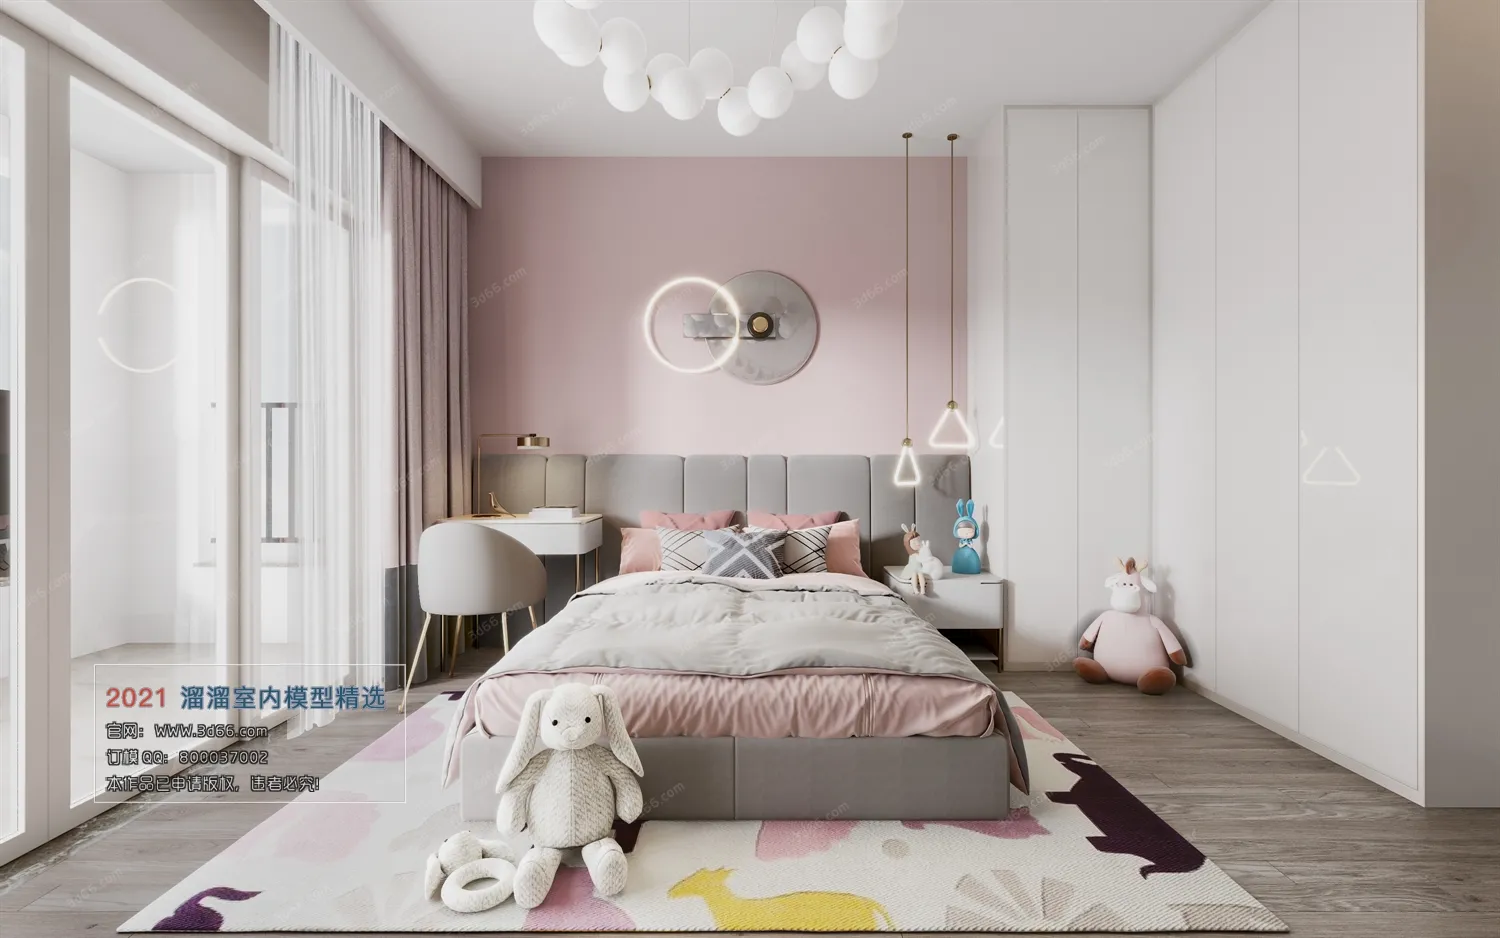 BEDROOM – A006-Modern style-Vray model